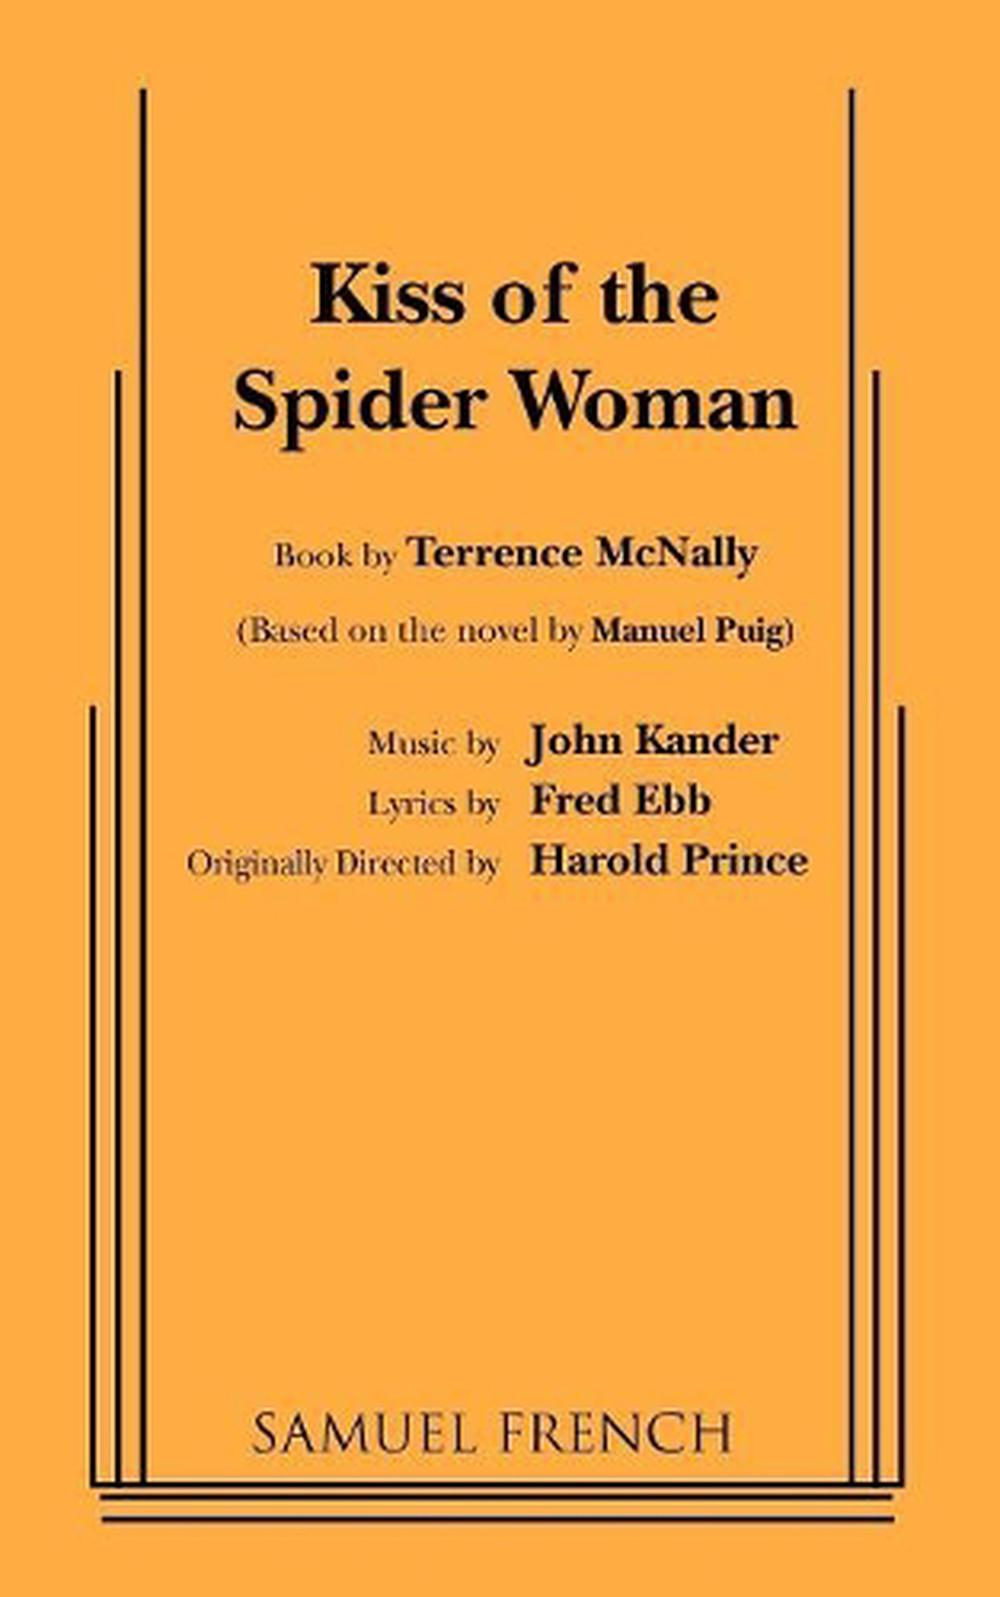 kiss of the spider woman book